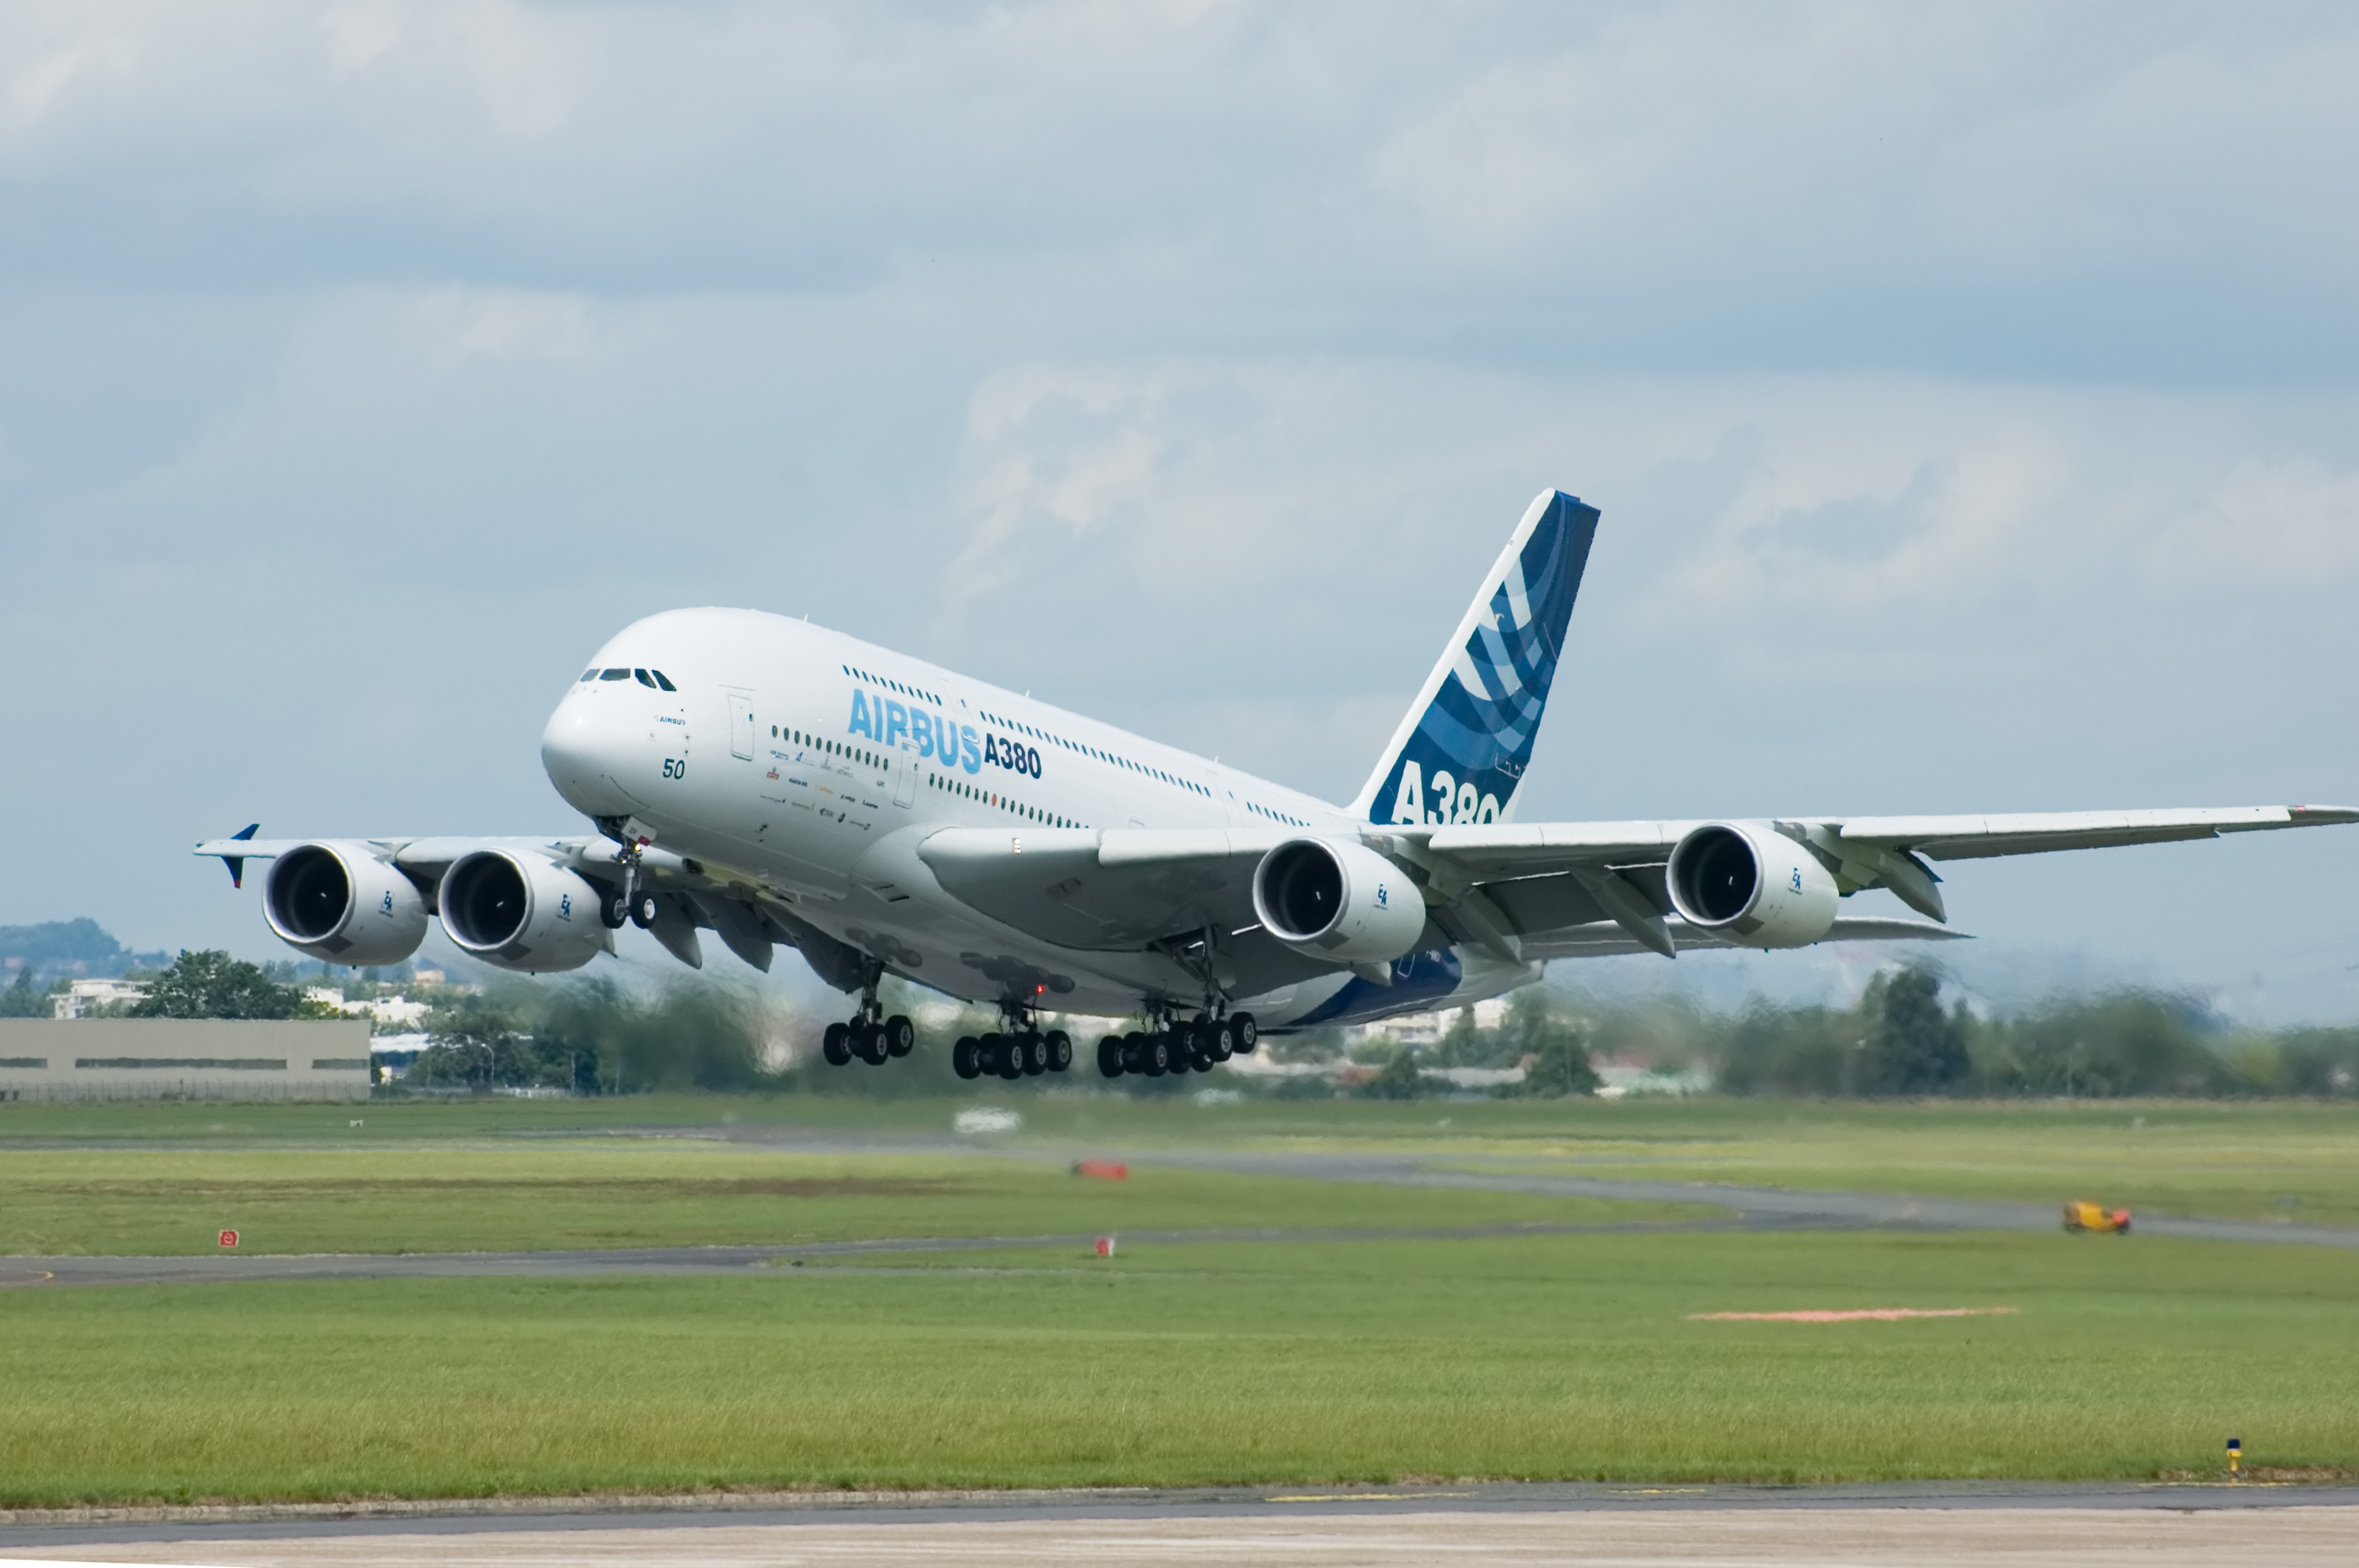 France urges parts review after Airbus A380 engine blowout